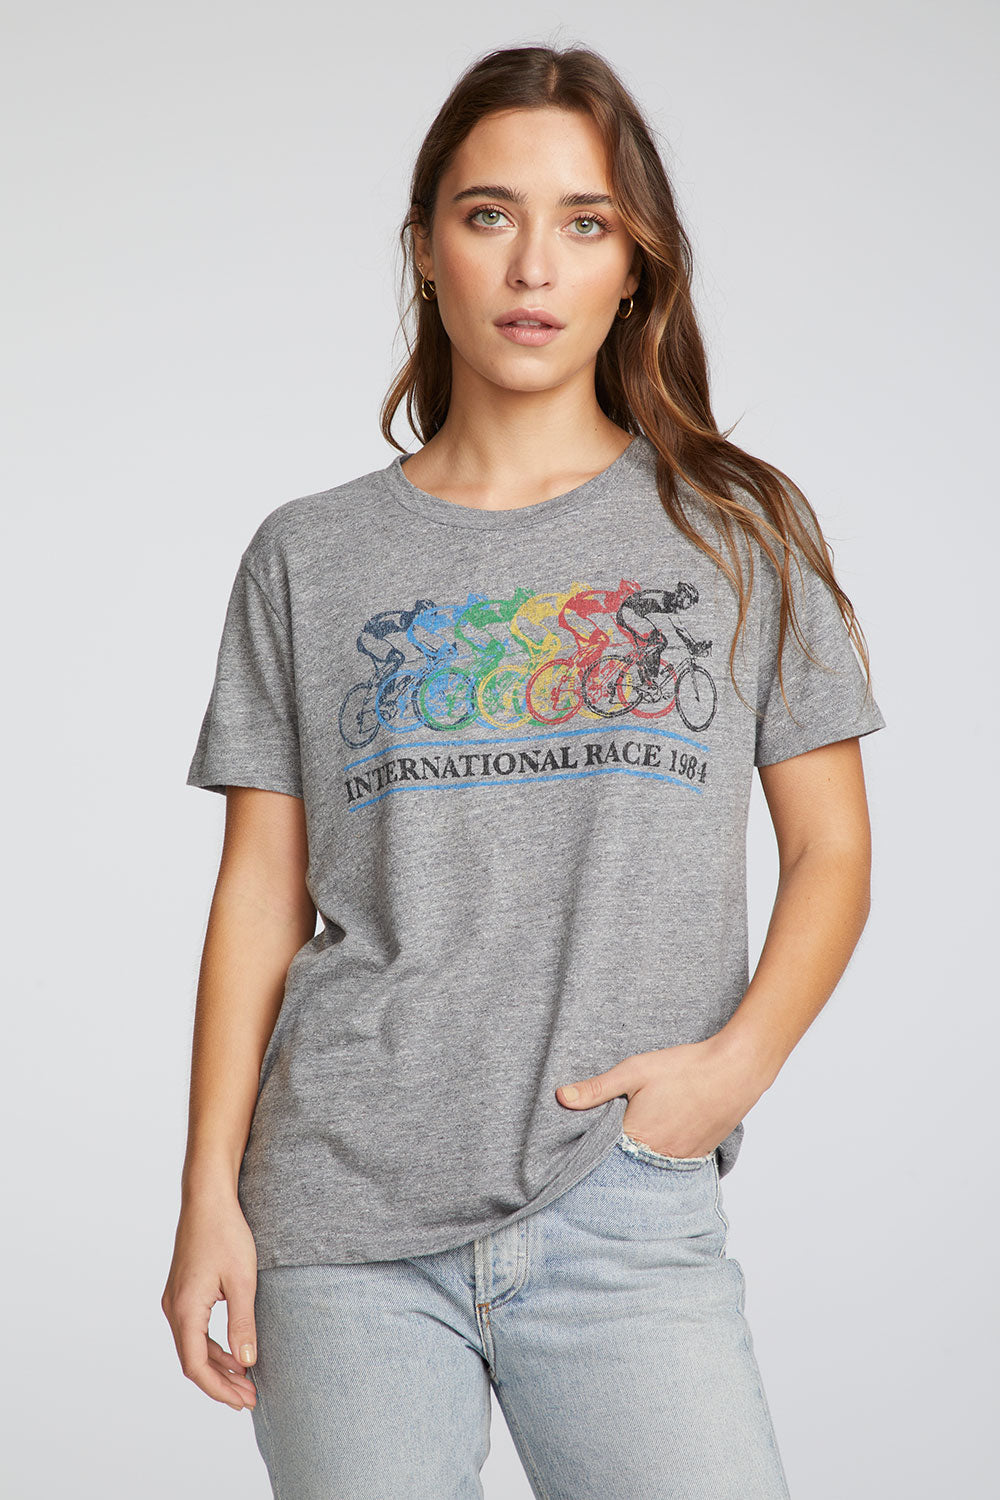 Vintage Cycling WOMENS chaserbrand